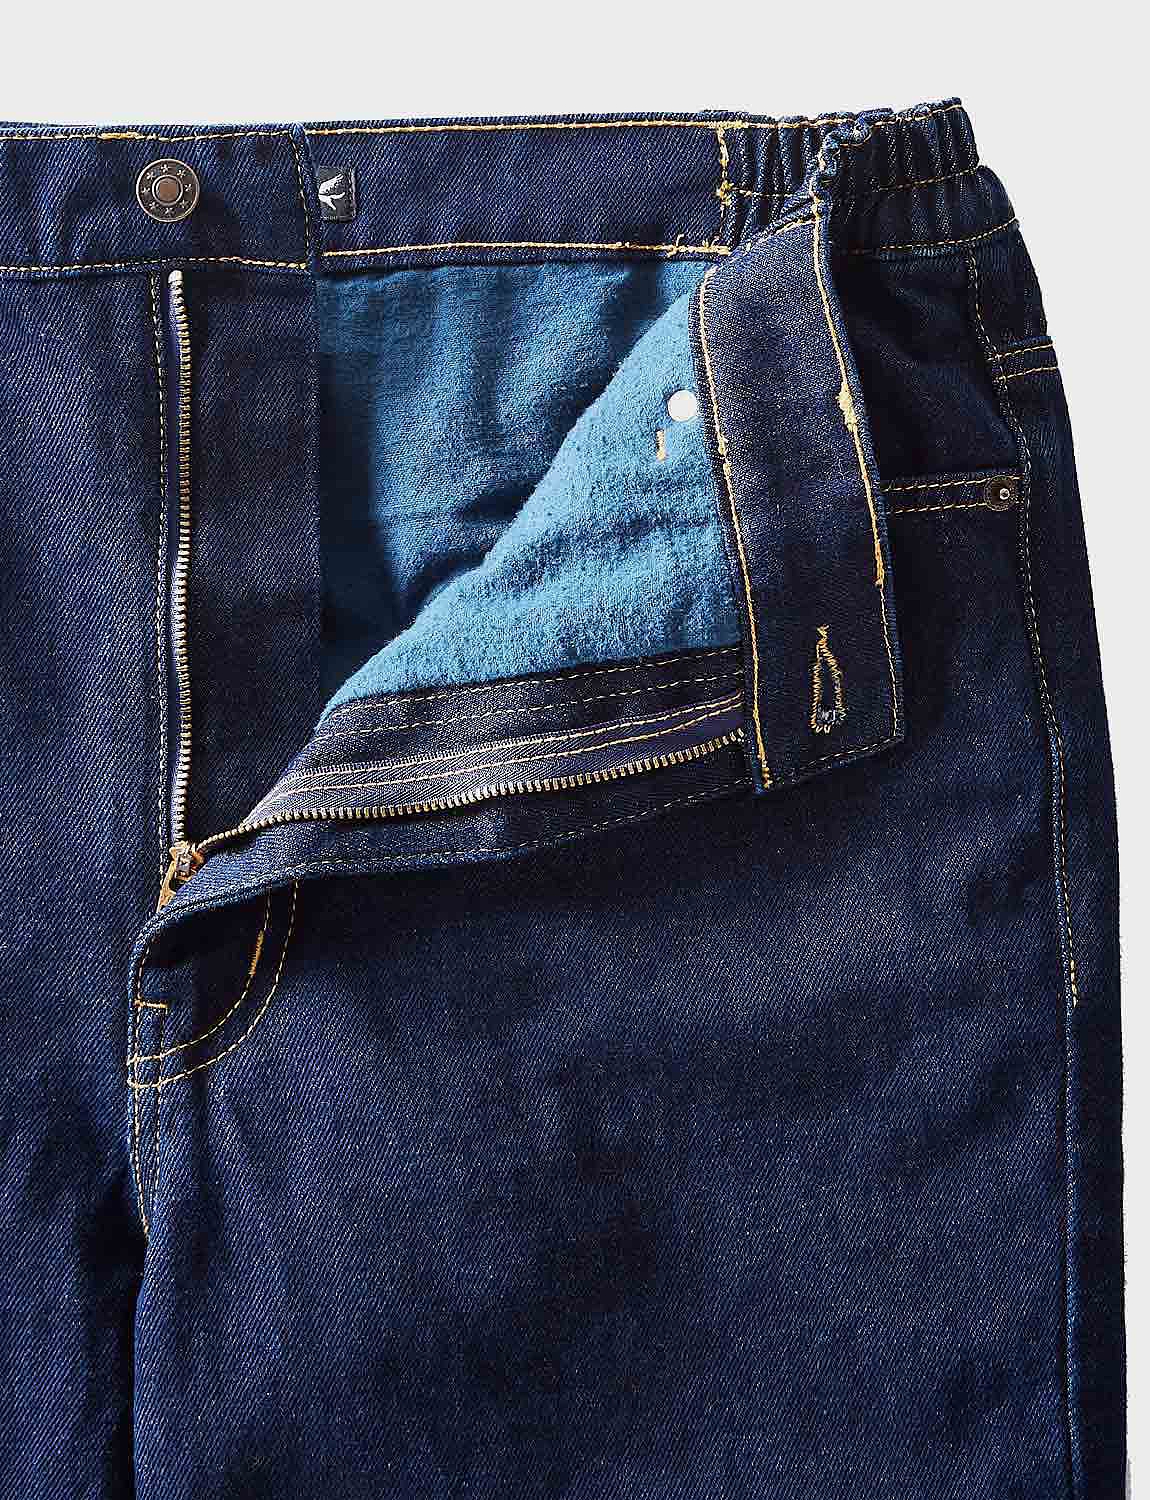 Pegasus Warm Lined Woven Jean | Chums